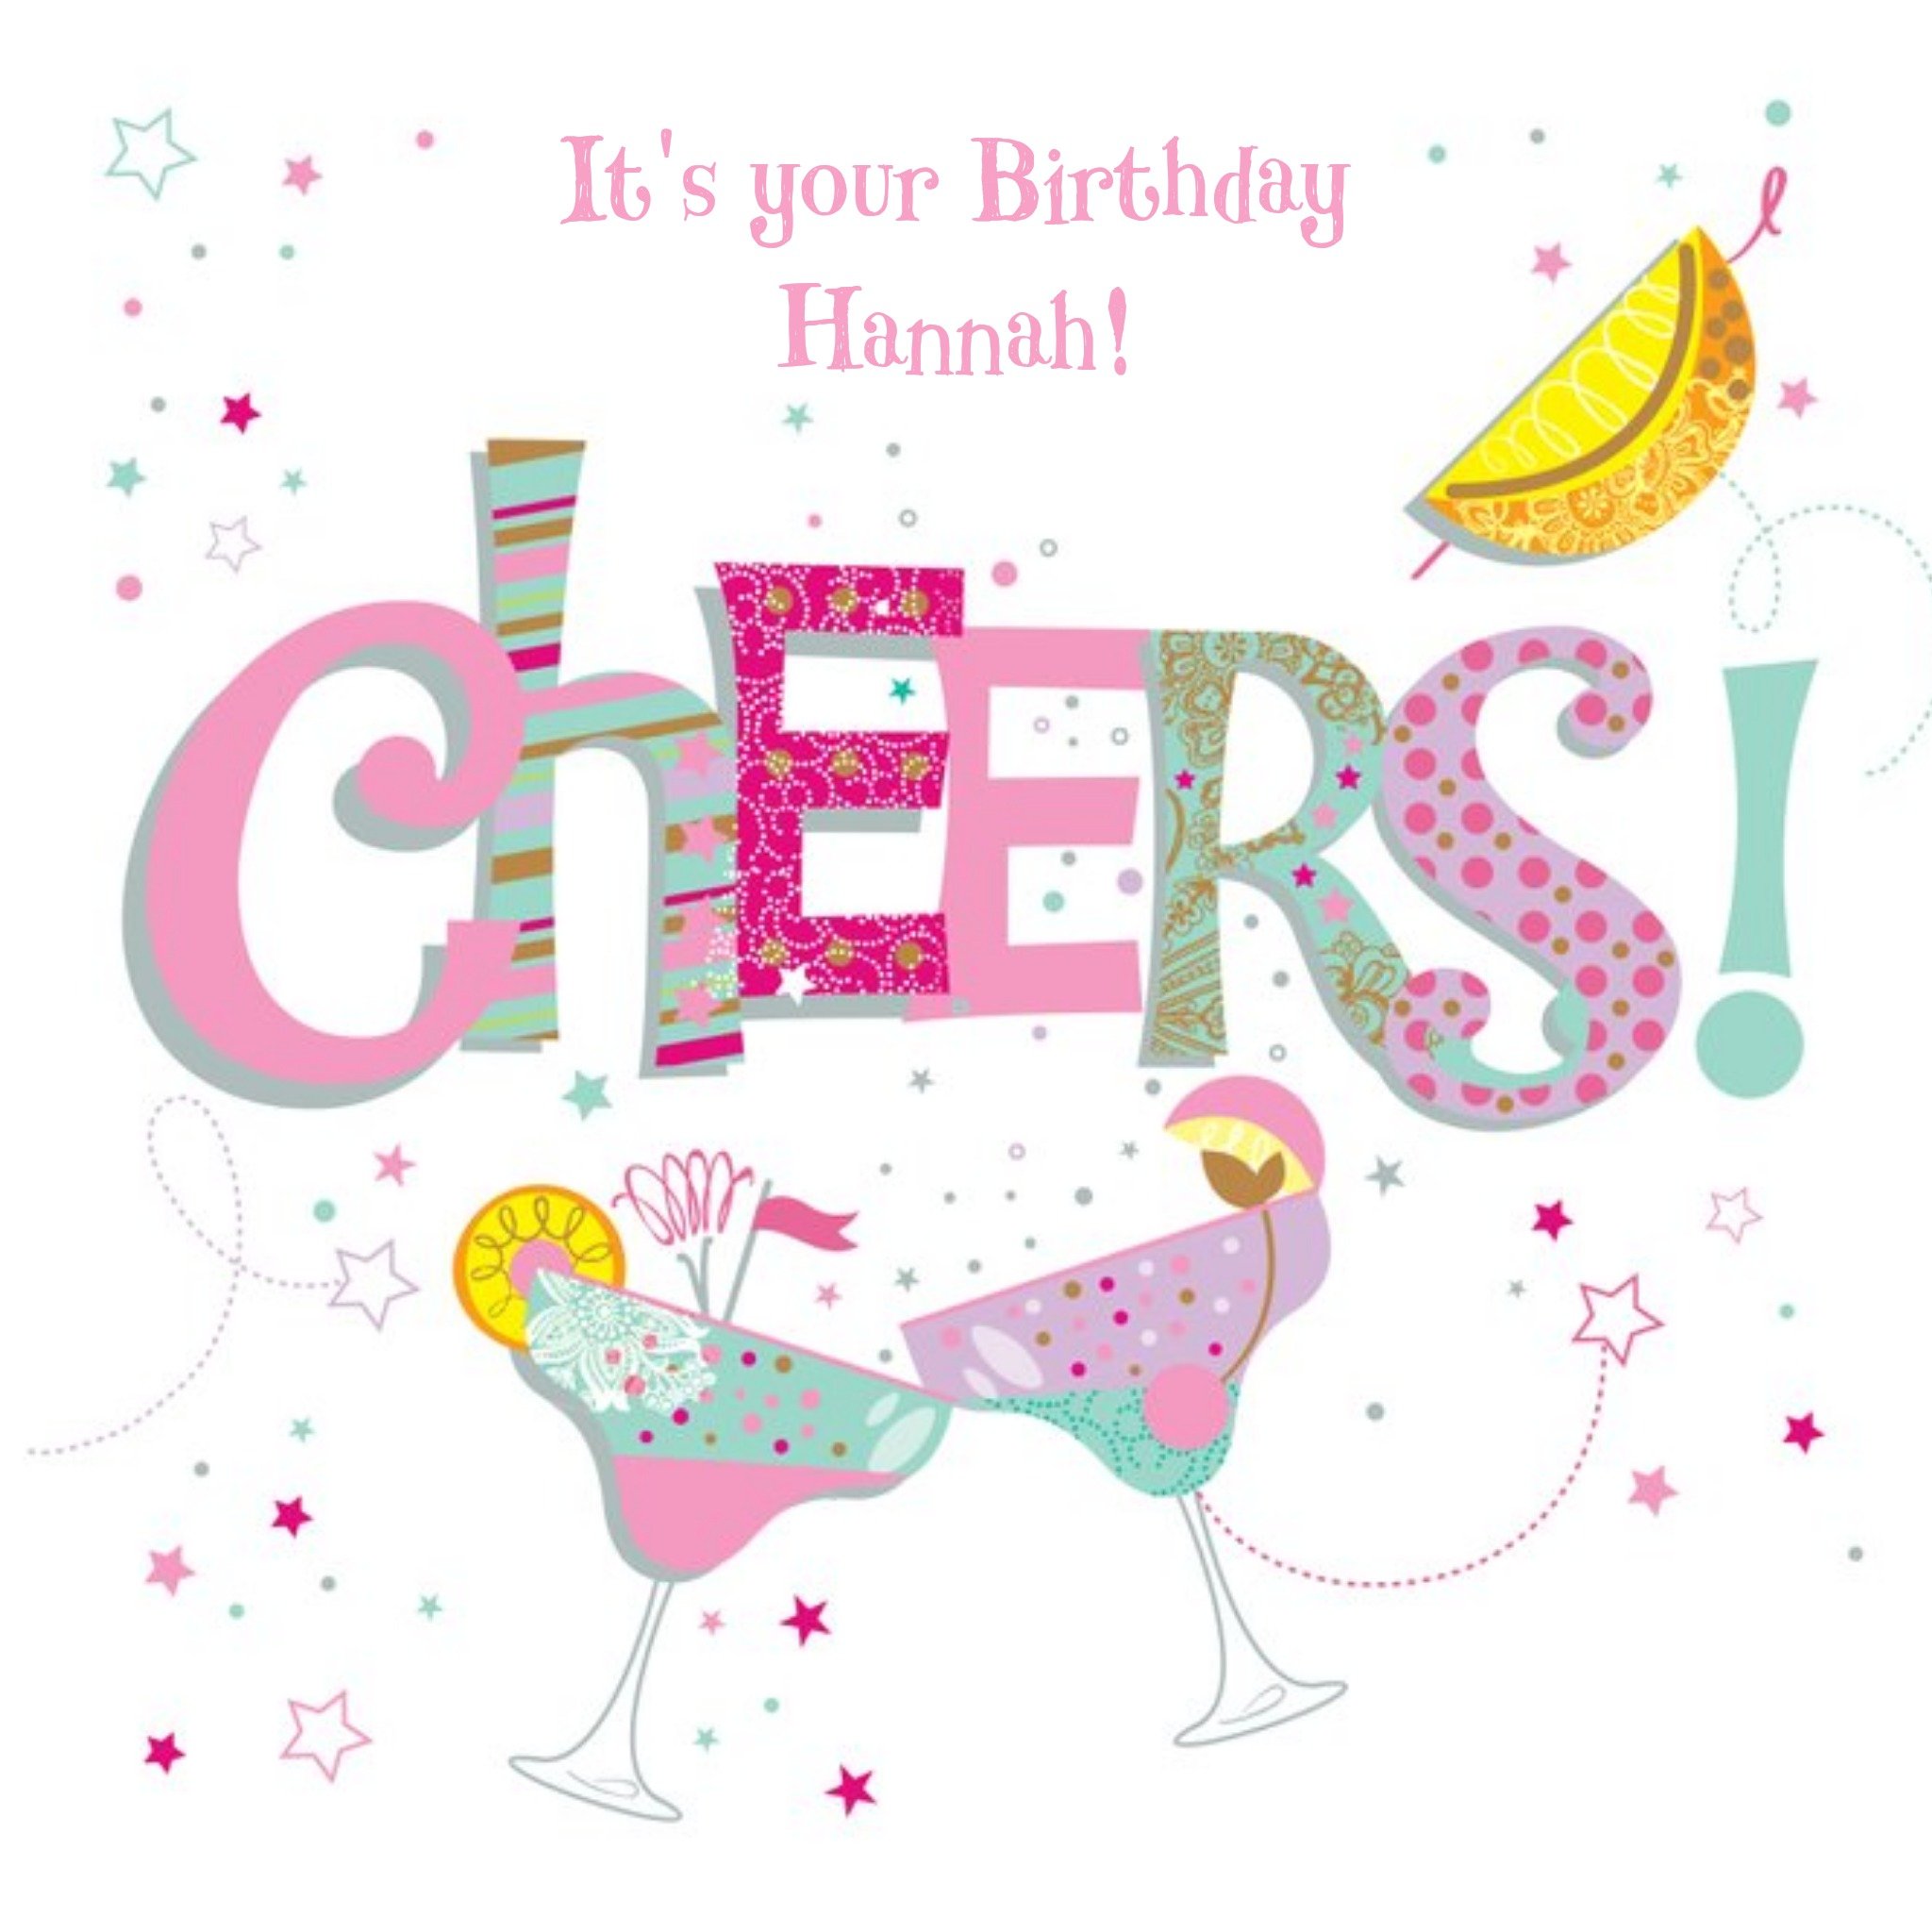 Ling Design Margarita Party Happy Birthday Card, Square